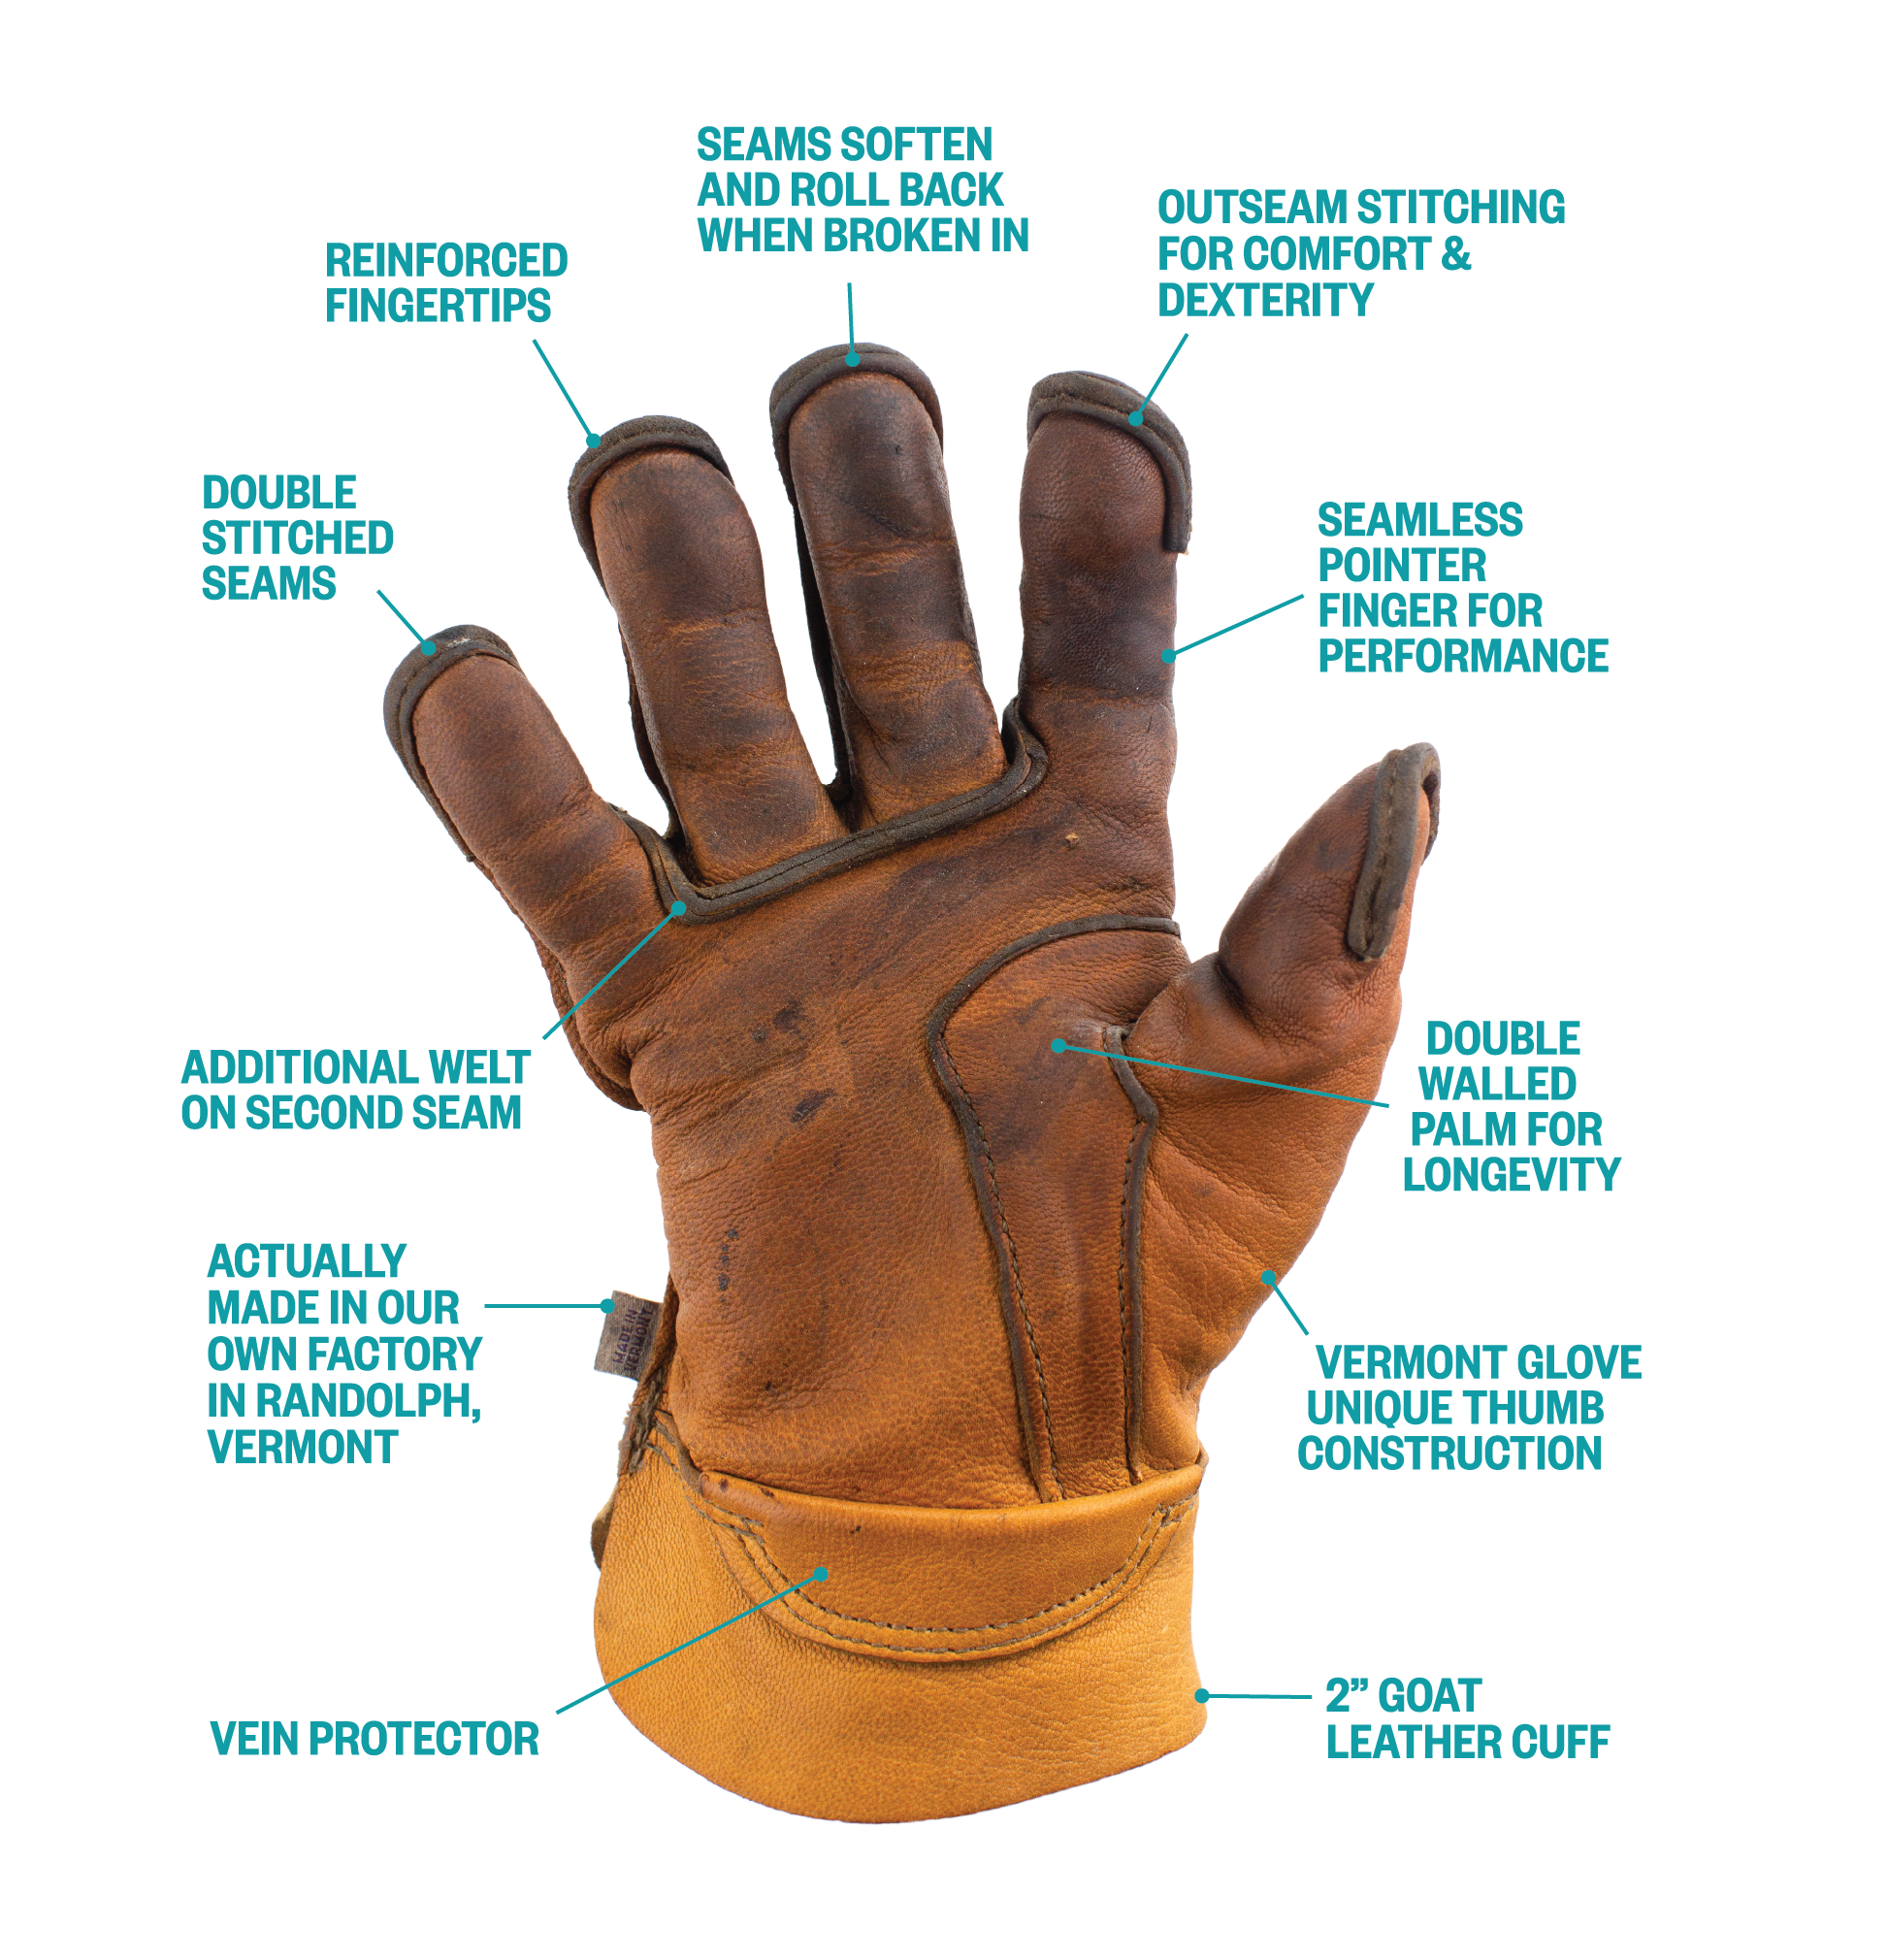 https://vermontglove.com/cdn/shop/products/VTG-ProductImage-FeatureCallout-Vermonter.png?v=1698334557&width=2000